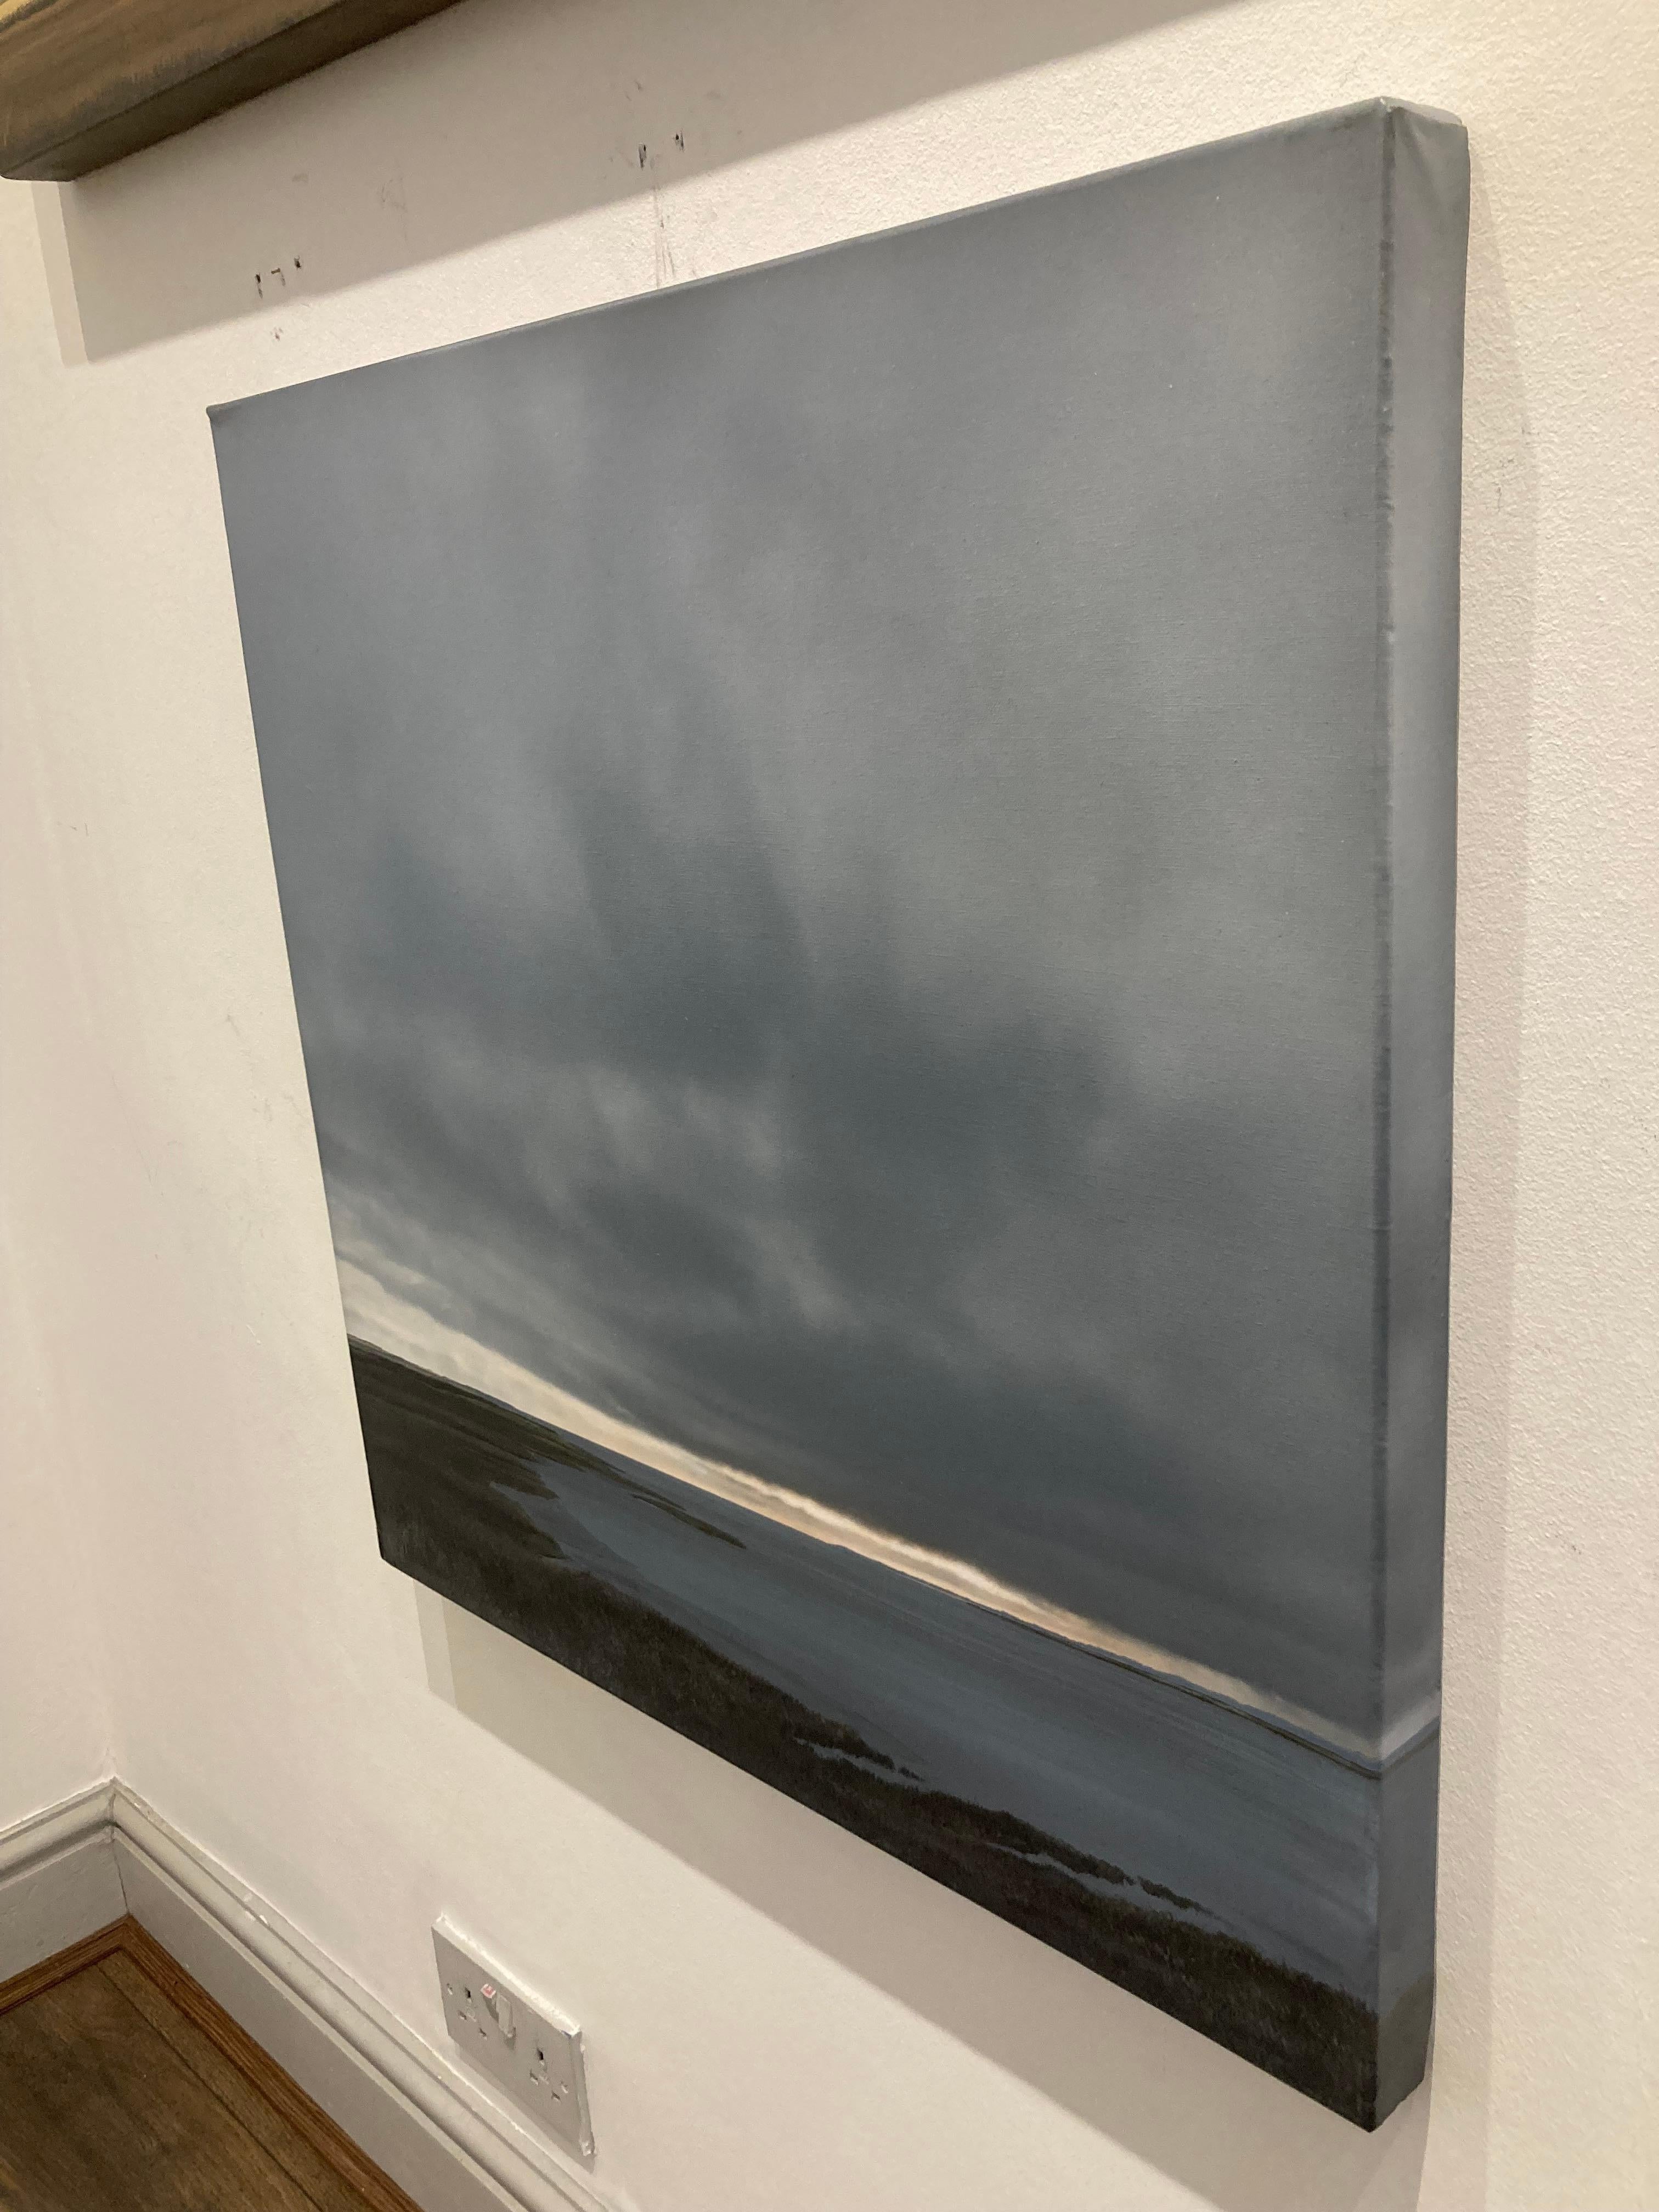 ‘Having first pursued my interest in landscape through photography and urban design, I have turned to landscape painting. This has led me to become a more analytical observer of the many forces operating in the environment and our responses to